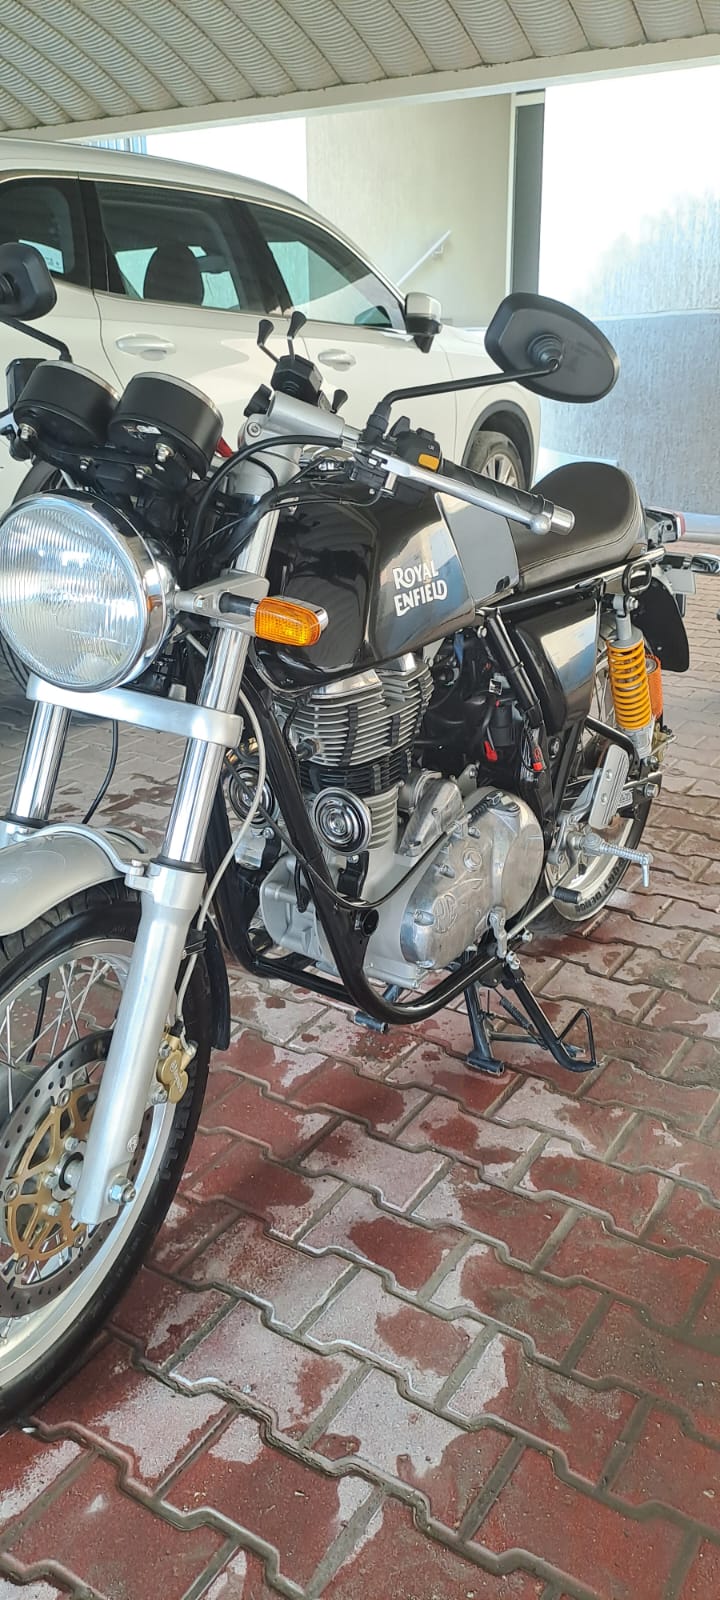 2018 Royal Enfield Continental GT 535 Like new URGENT selling 